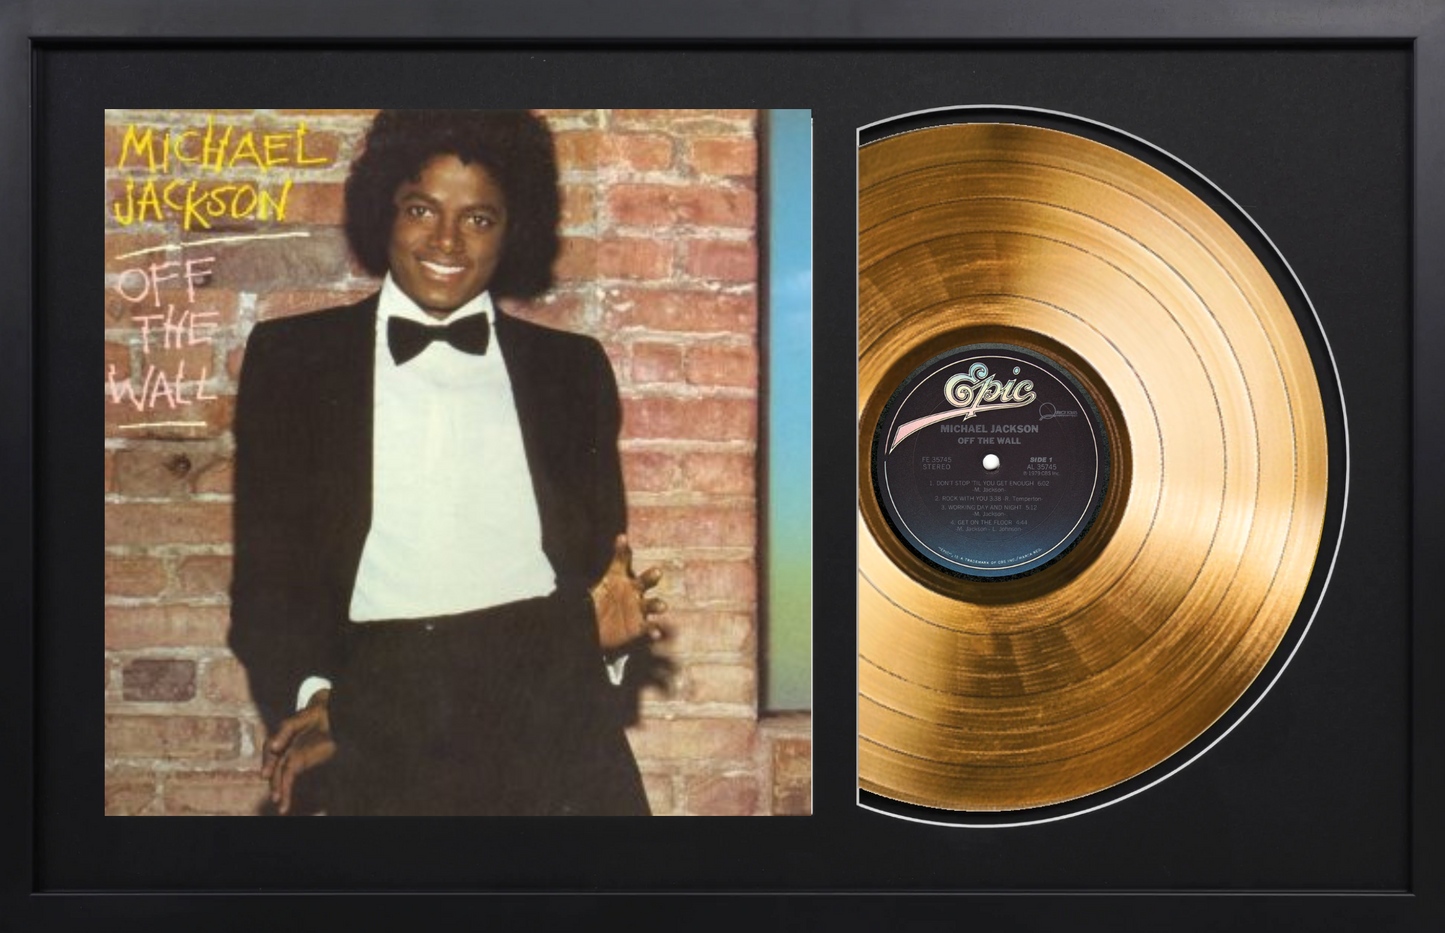 Michael Jackson - Off The Wall - 14K Gold Plated, Limited Edition Album